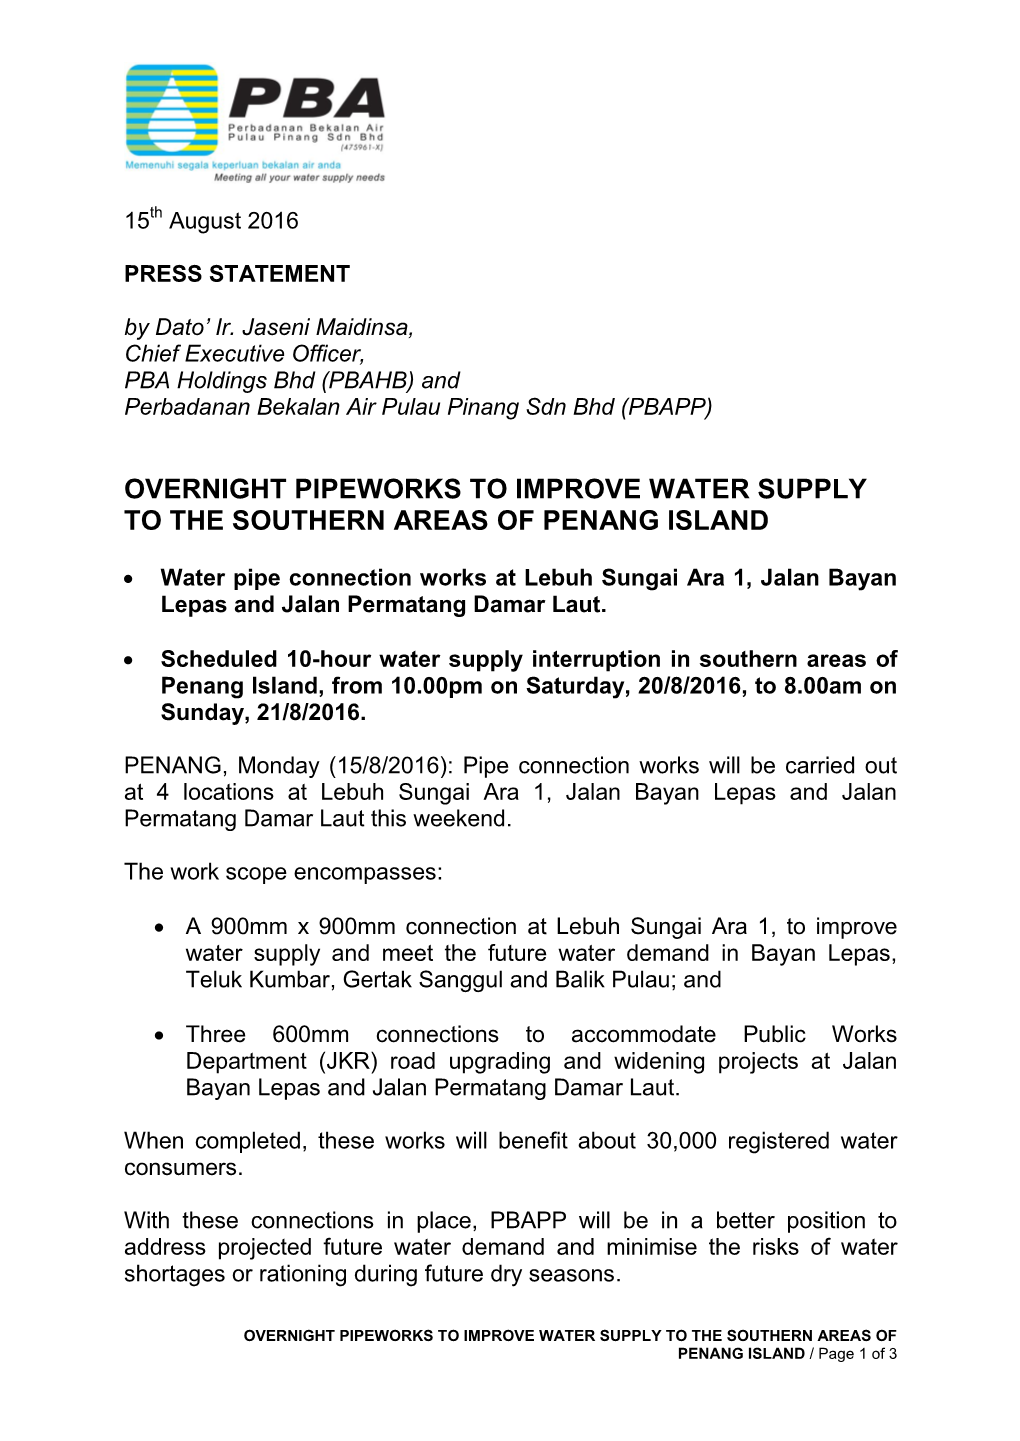 Overnight Pipeworks to Improve Water Supply to the Southern Areas of Penang Island